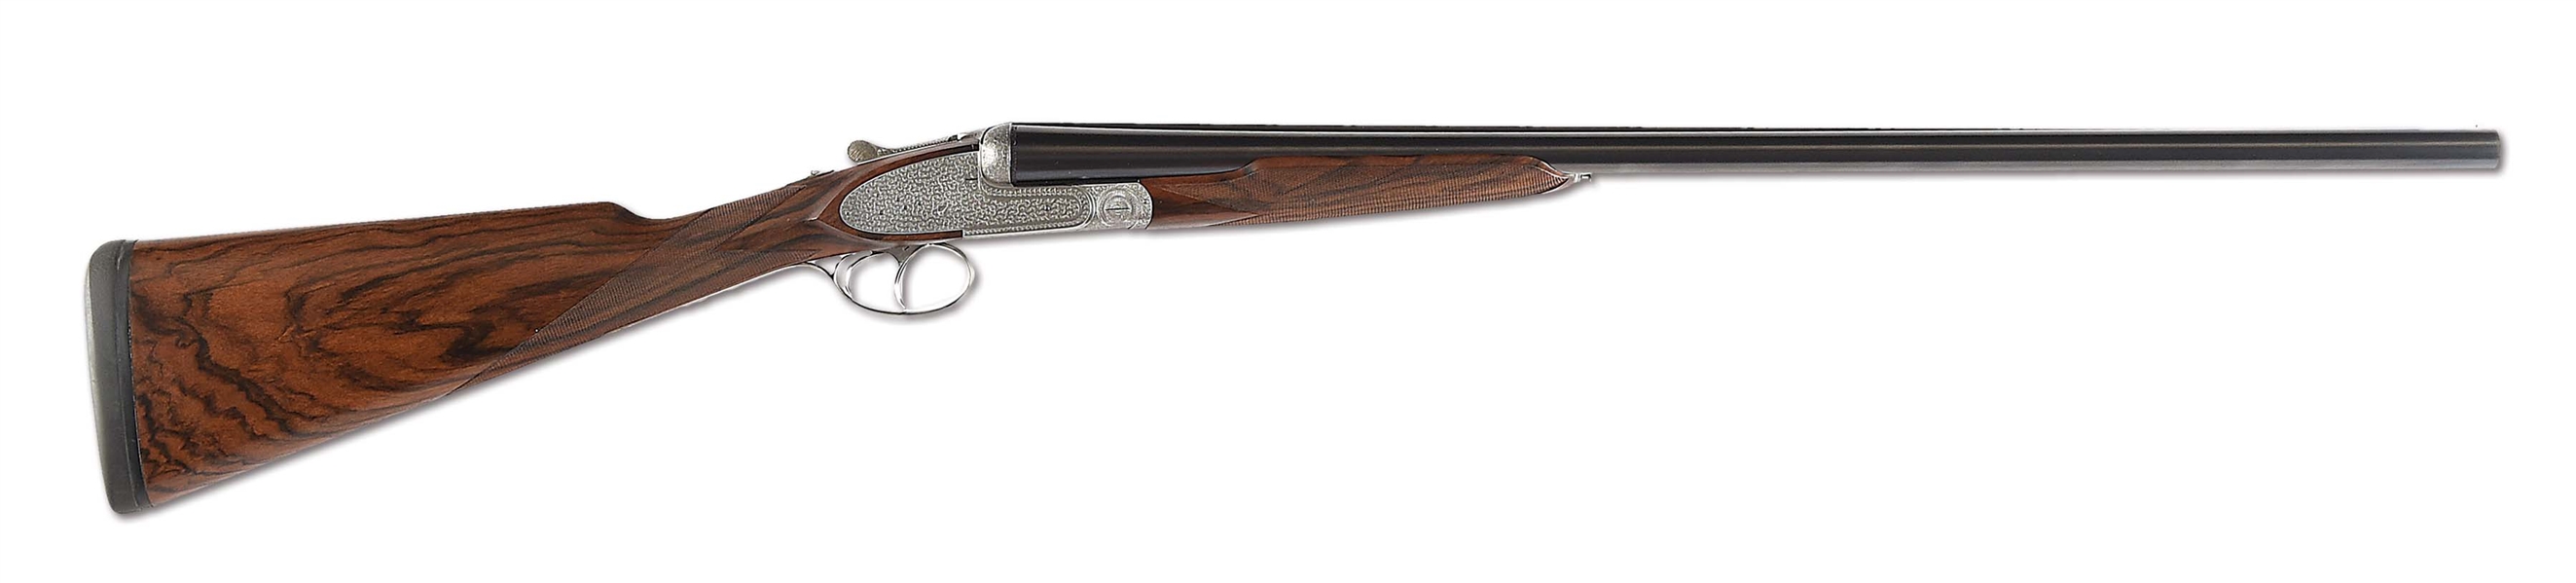 (M) SUPERB AND UNIQUE PIOTTI KING EXTRA 12 BORE SIDELOCK EJECTOR GAME GUN- GUN #1 IN "THE SET FOR LIFE".  